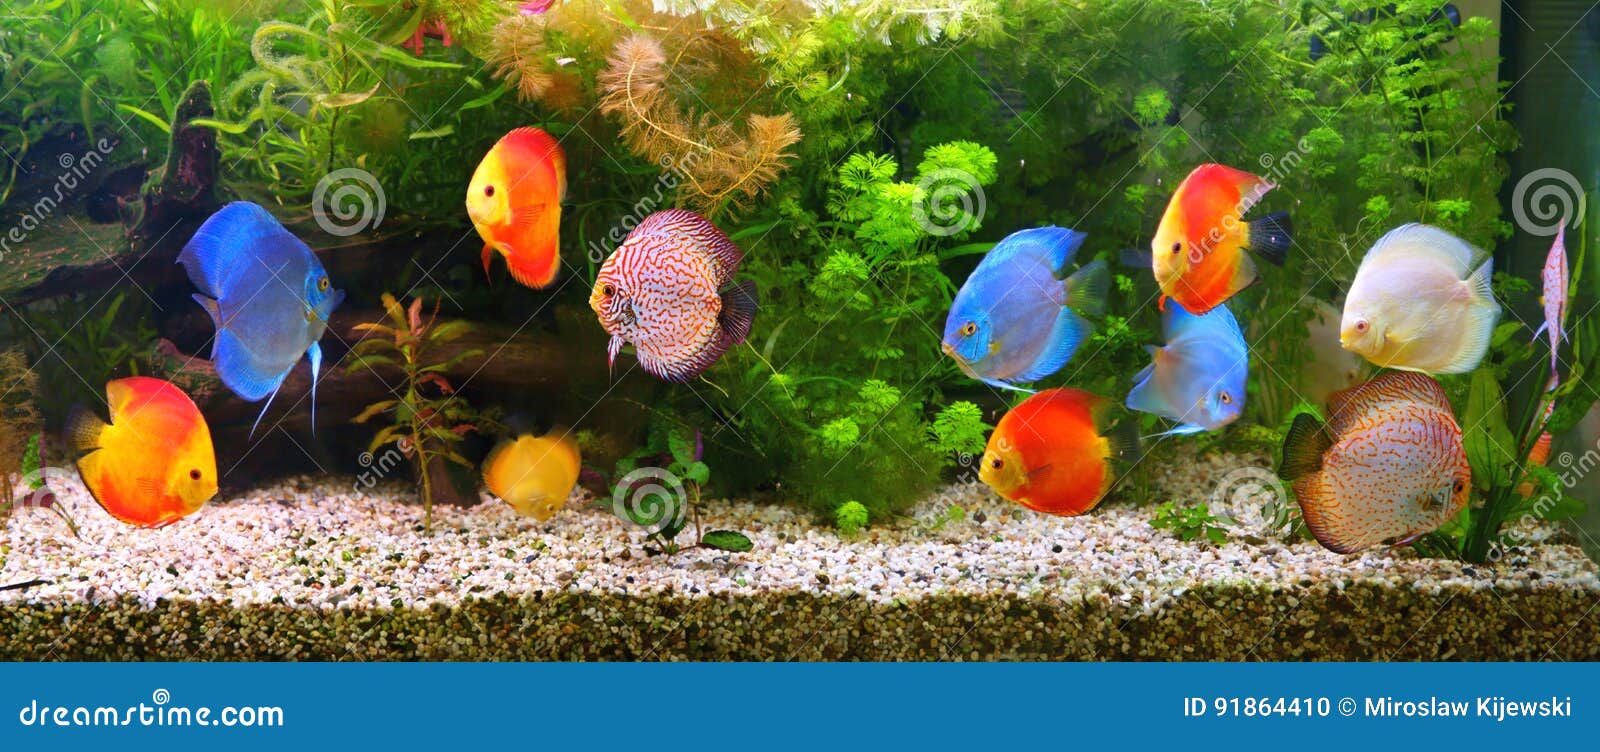 Discus Symphysodon Multi Colored Cichlids In The Aquarium The Freshwater Fish Native To The Amazon River Basin Stock Photo Image Of Melon Plants